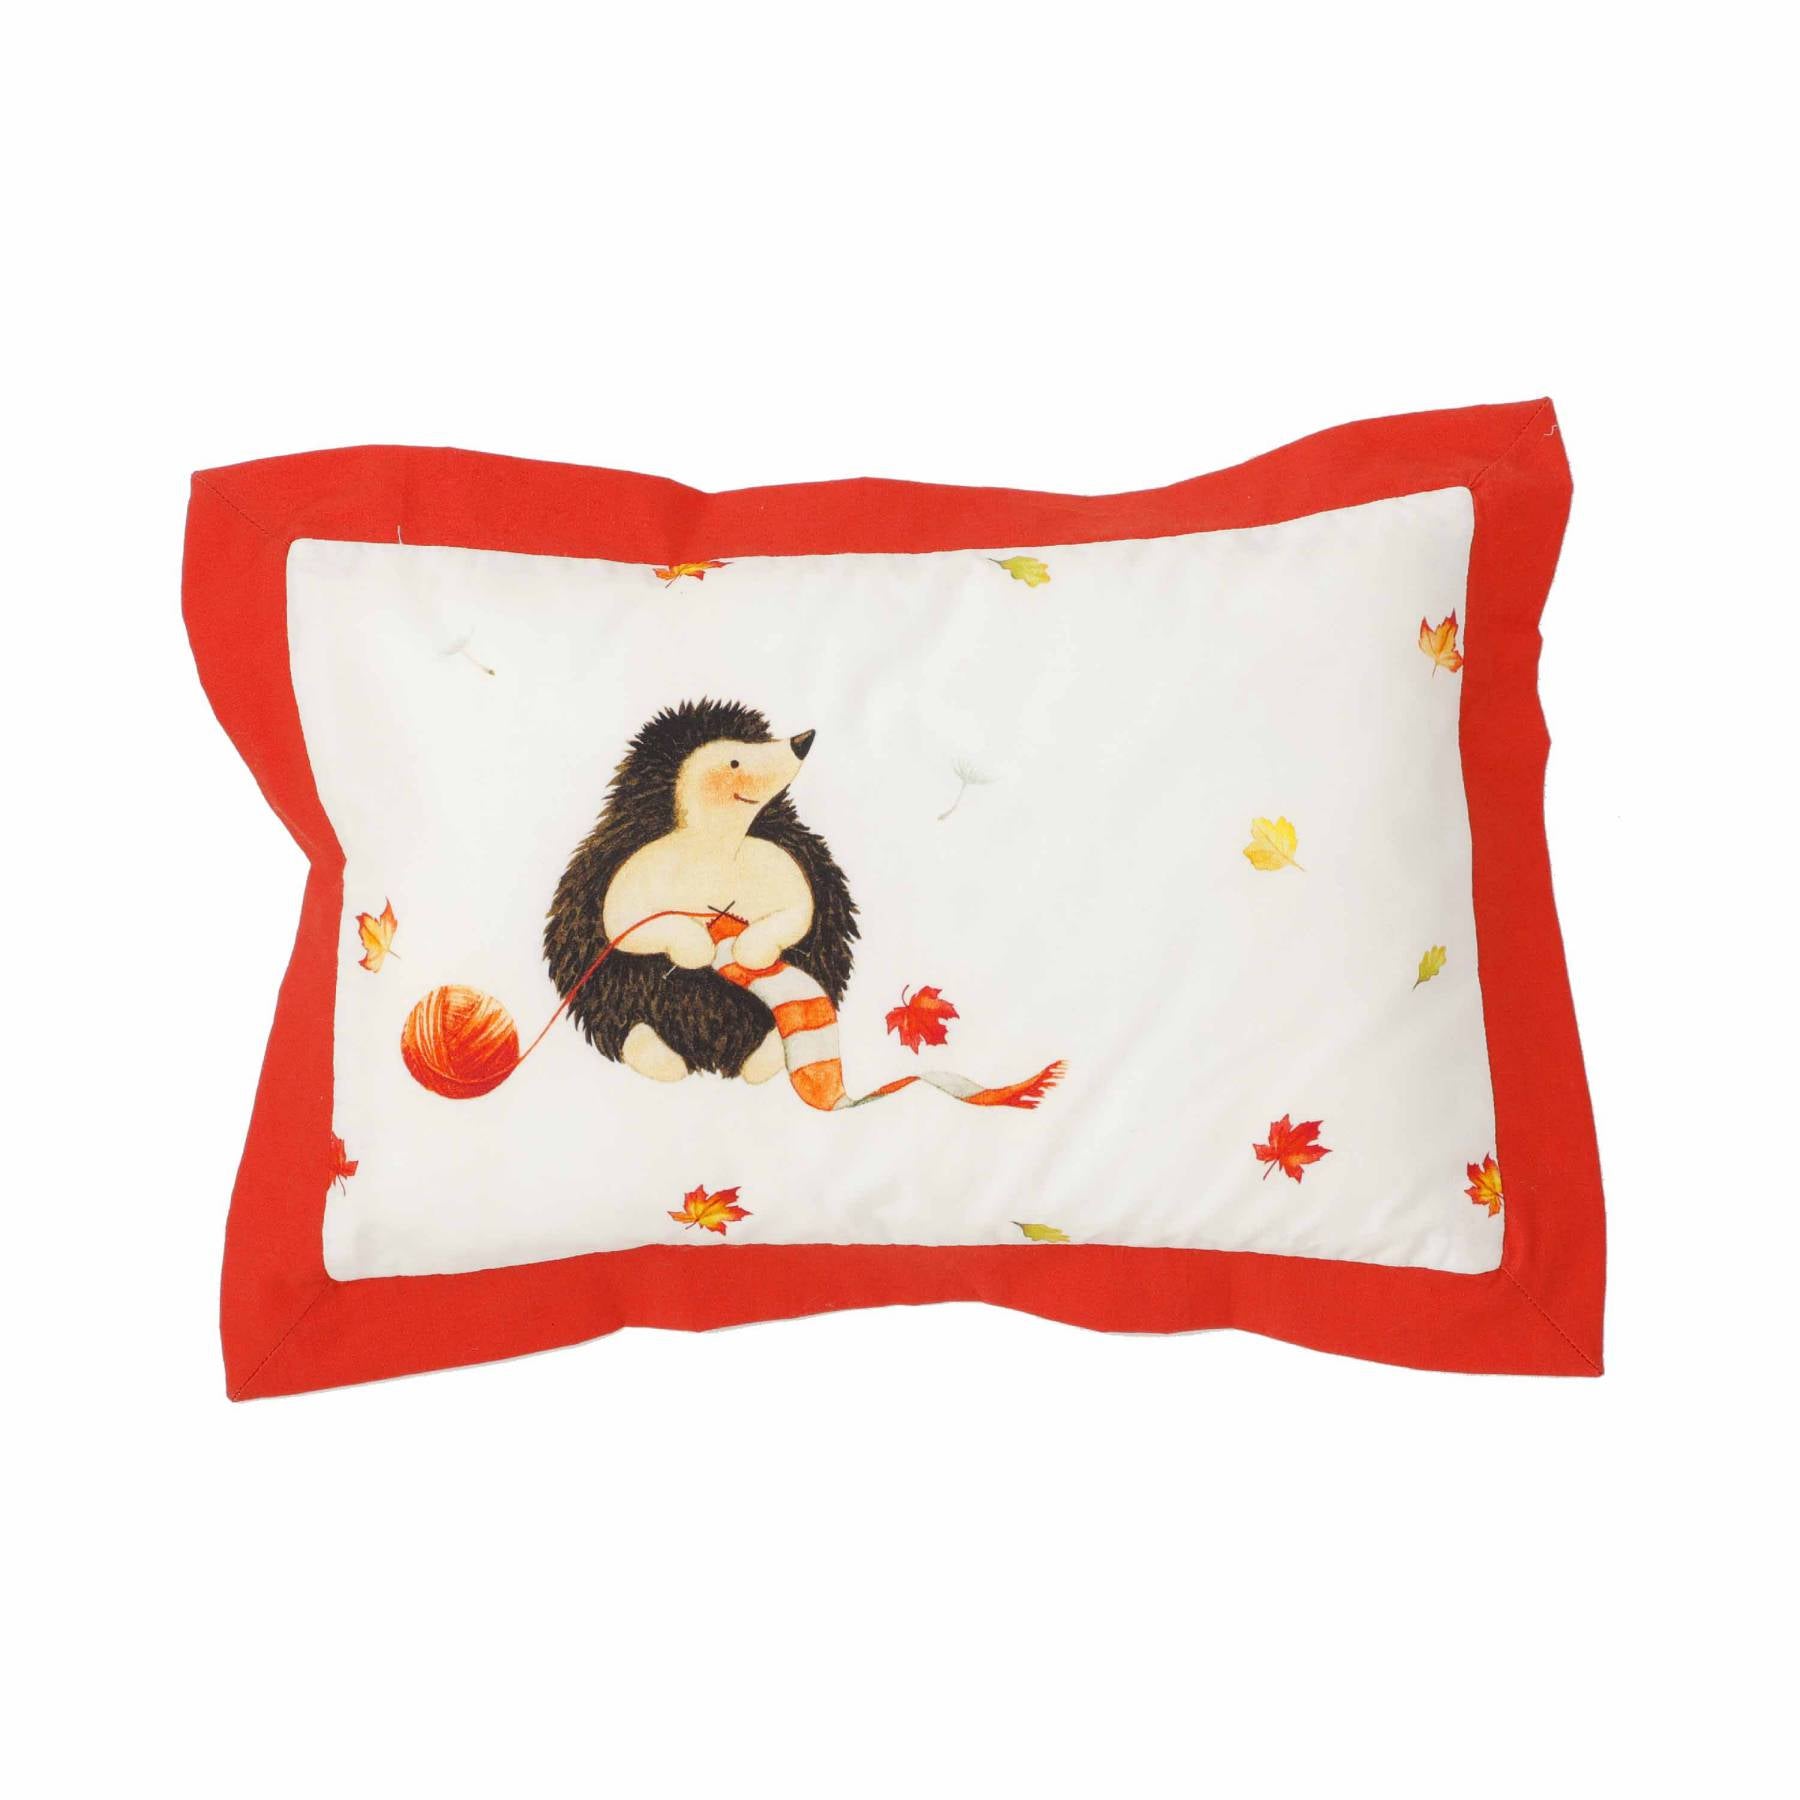 Hoggy the Hedgehog - Baby Pillow